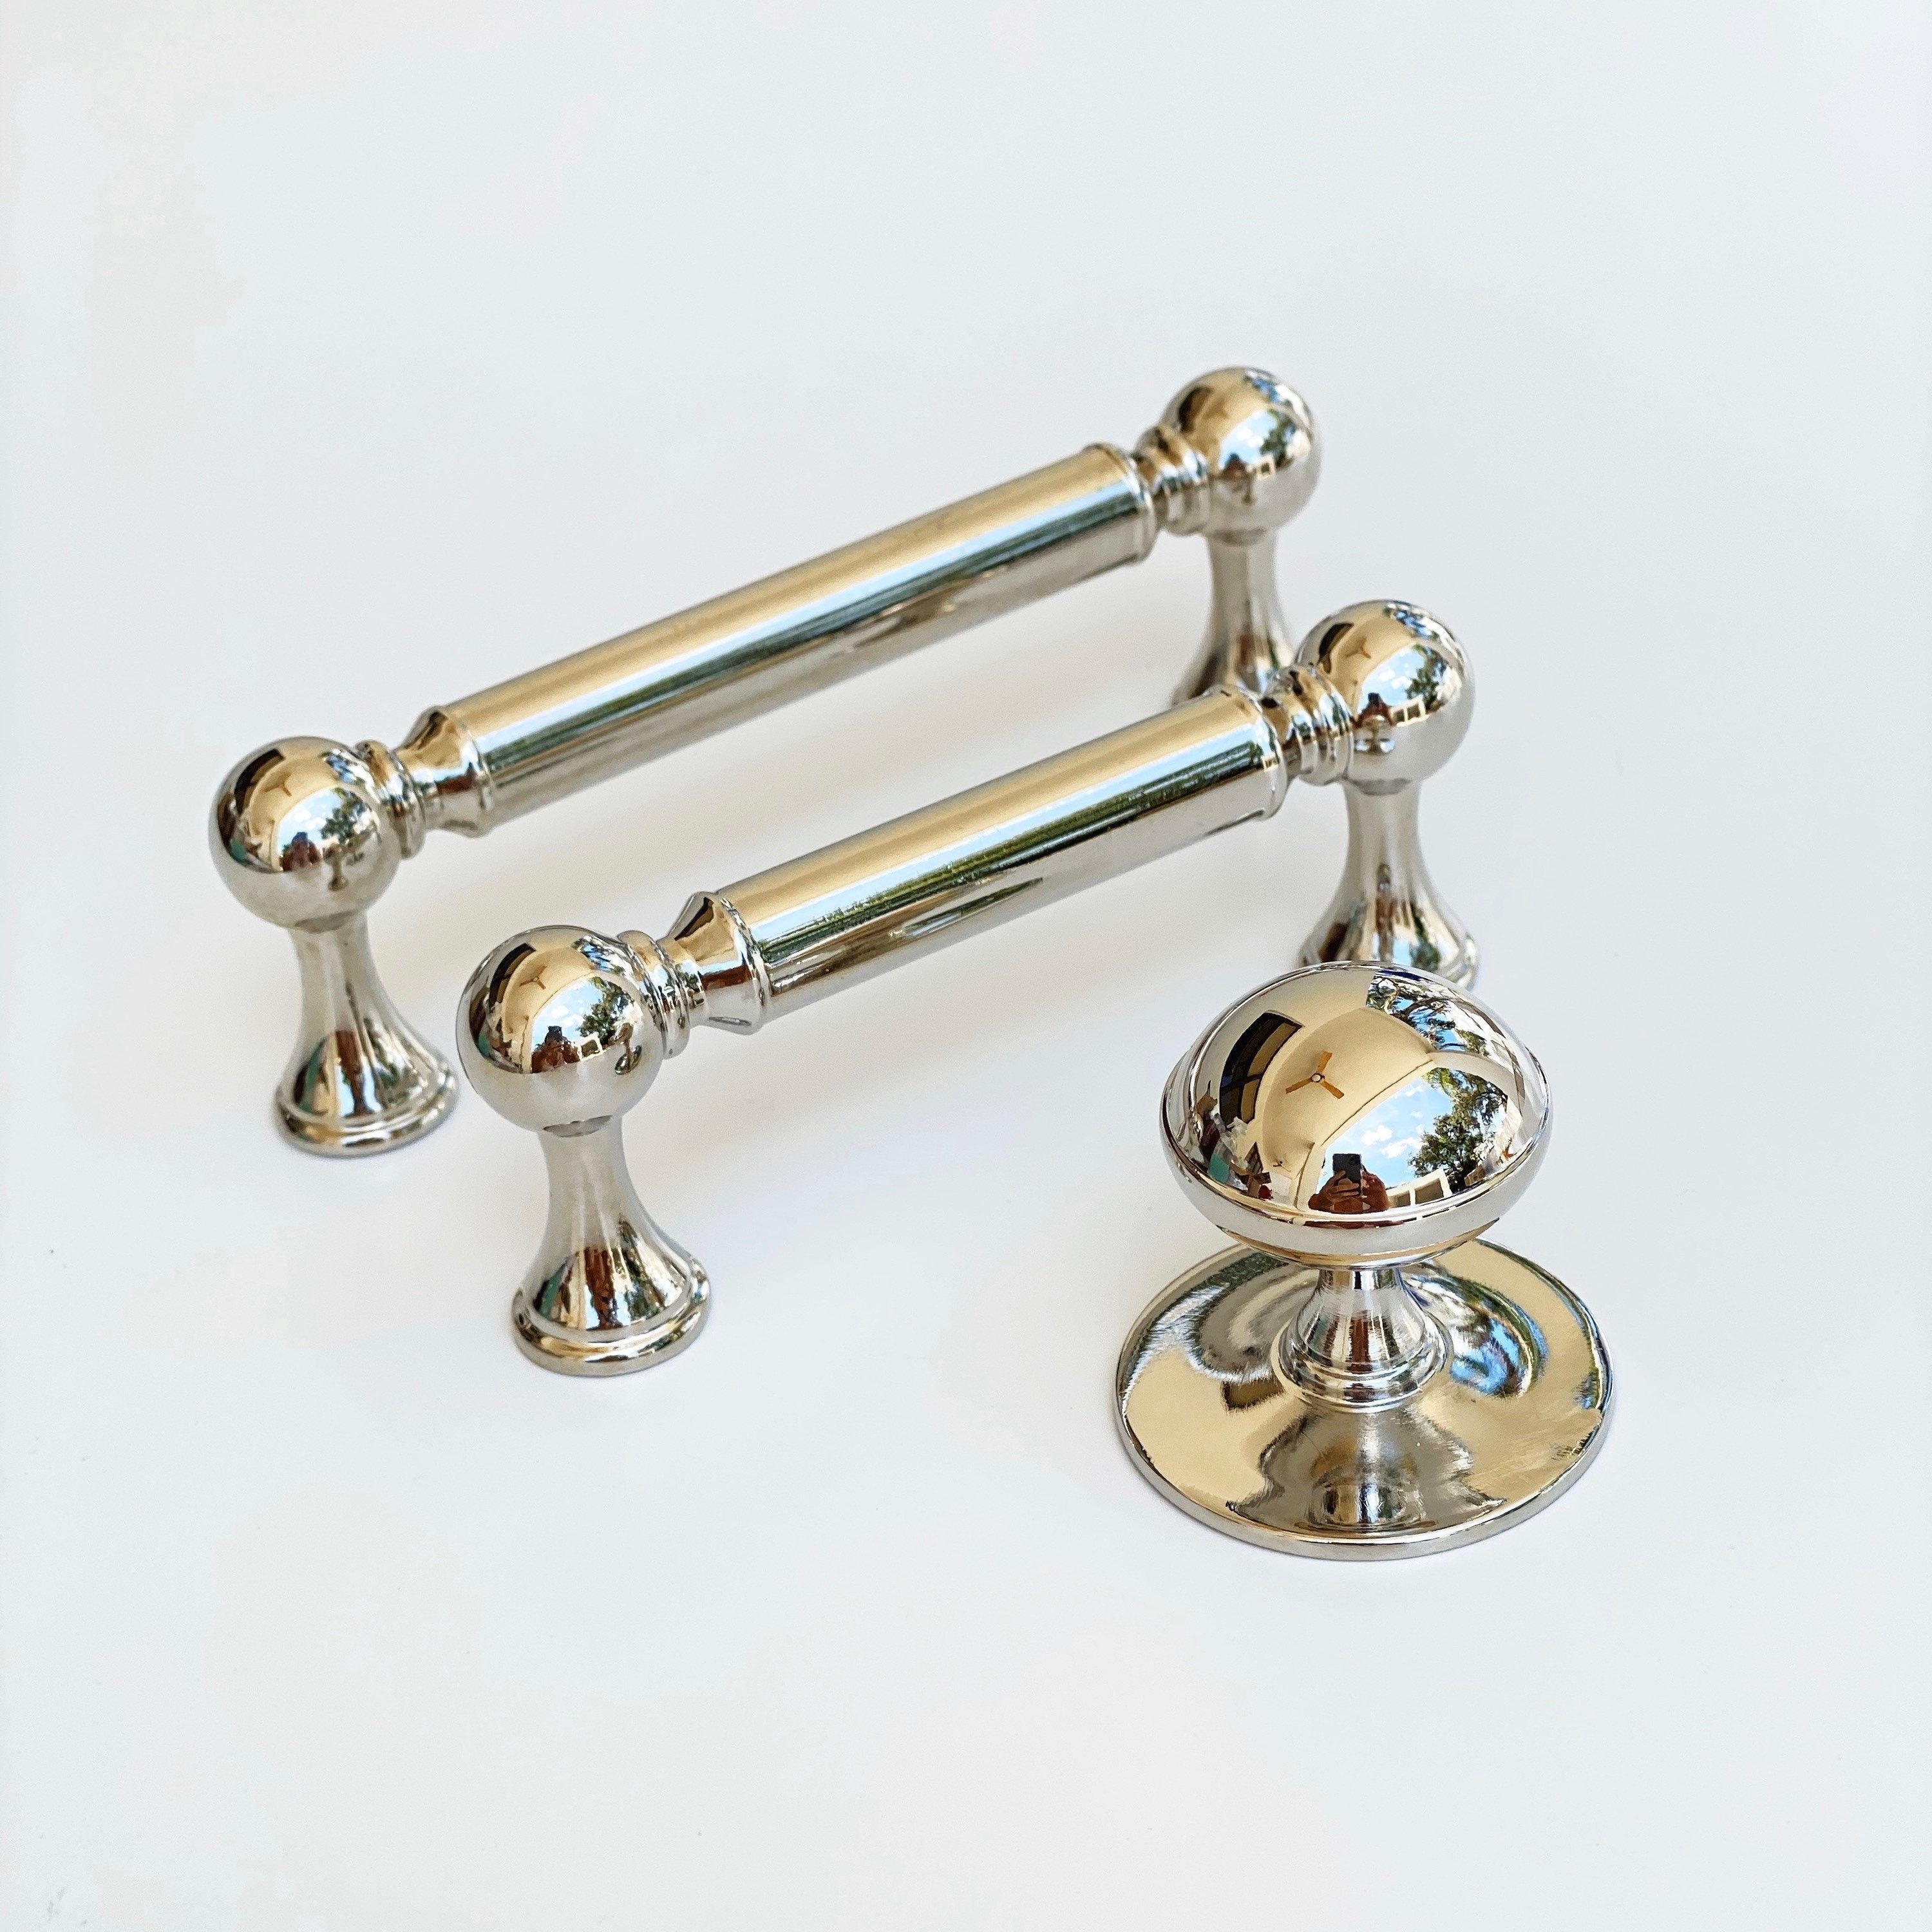 Polished Nickel Moderna Drawer Pulls and Cabinet Knobs